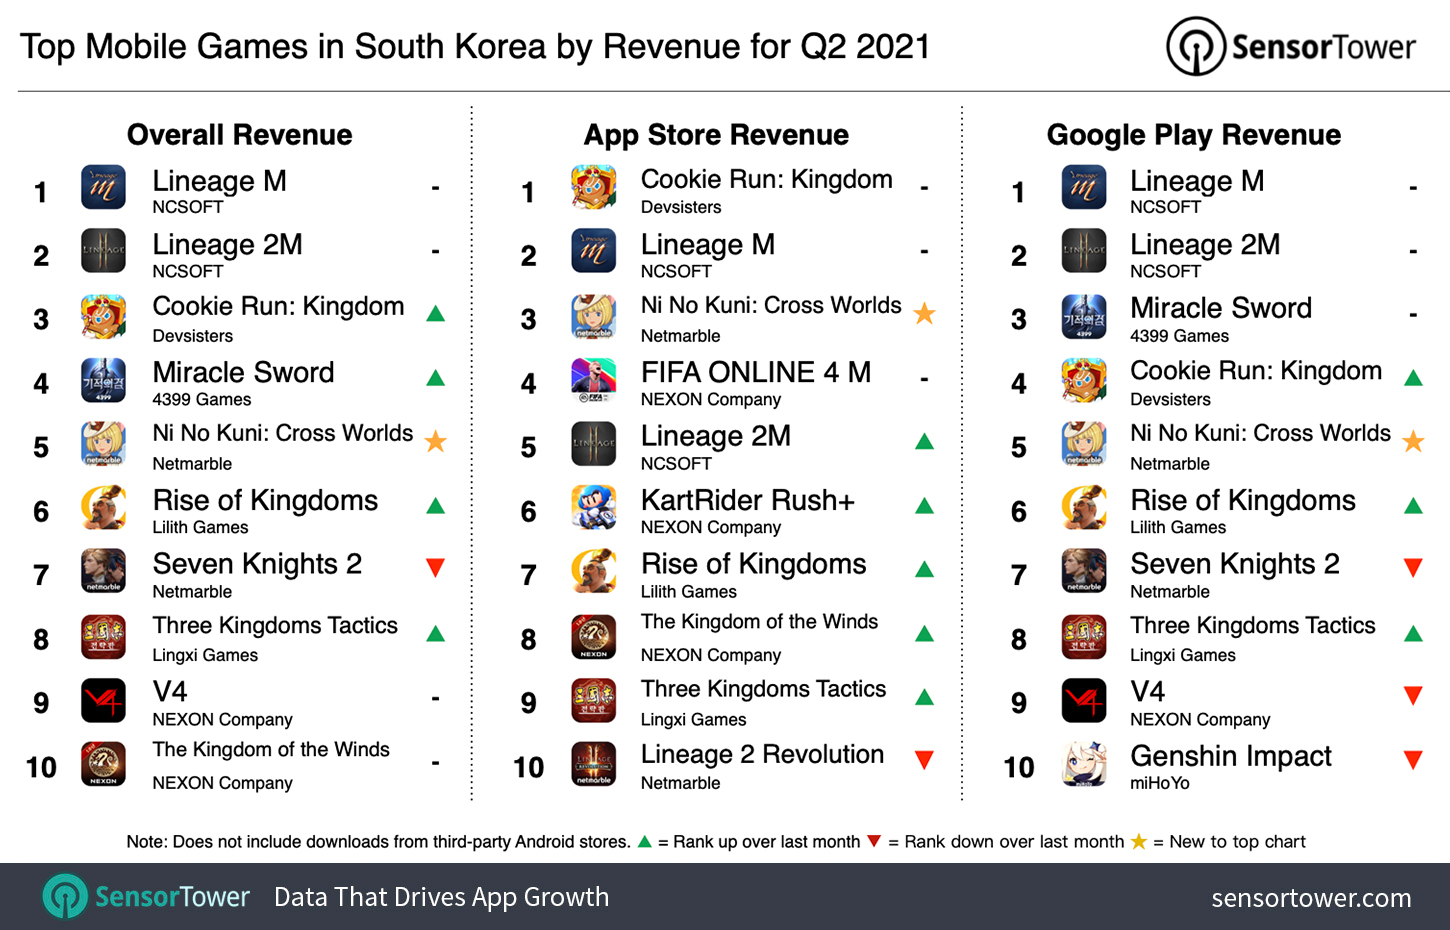 Top Mobile Games in South Korea for Q2 2021 by Revenue and Downloads